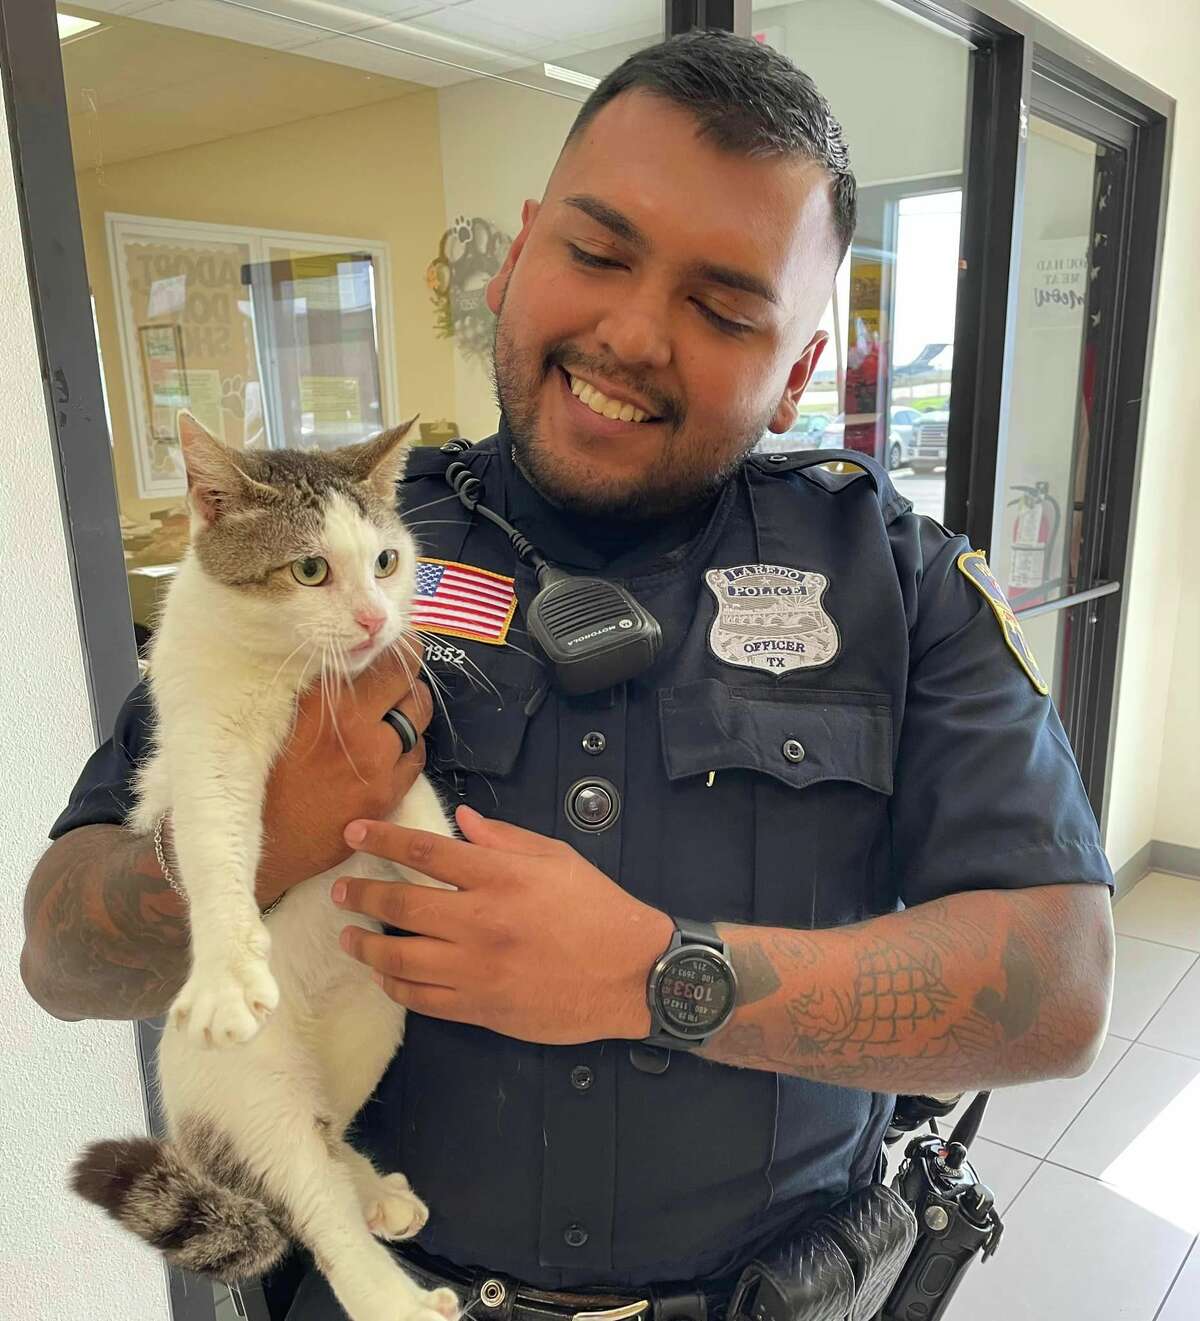 Officer C. Leal from the Laredo Police Department is pictured with Luna, a 3-year-old c cat up for adoption through Laredo Animal Care Services.